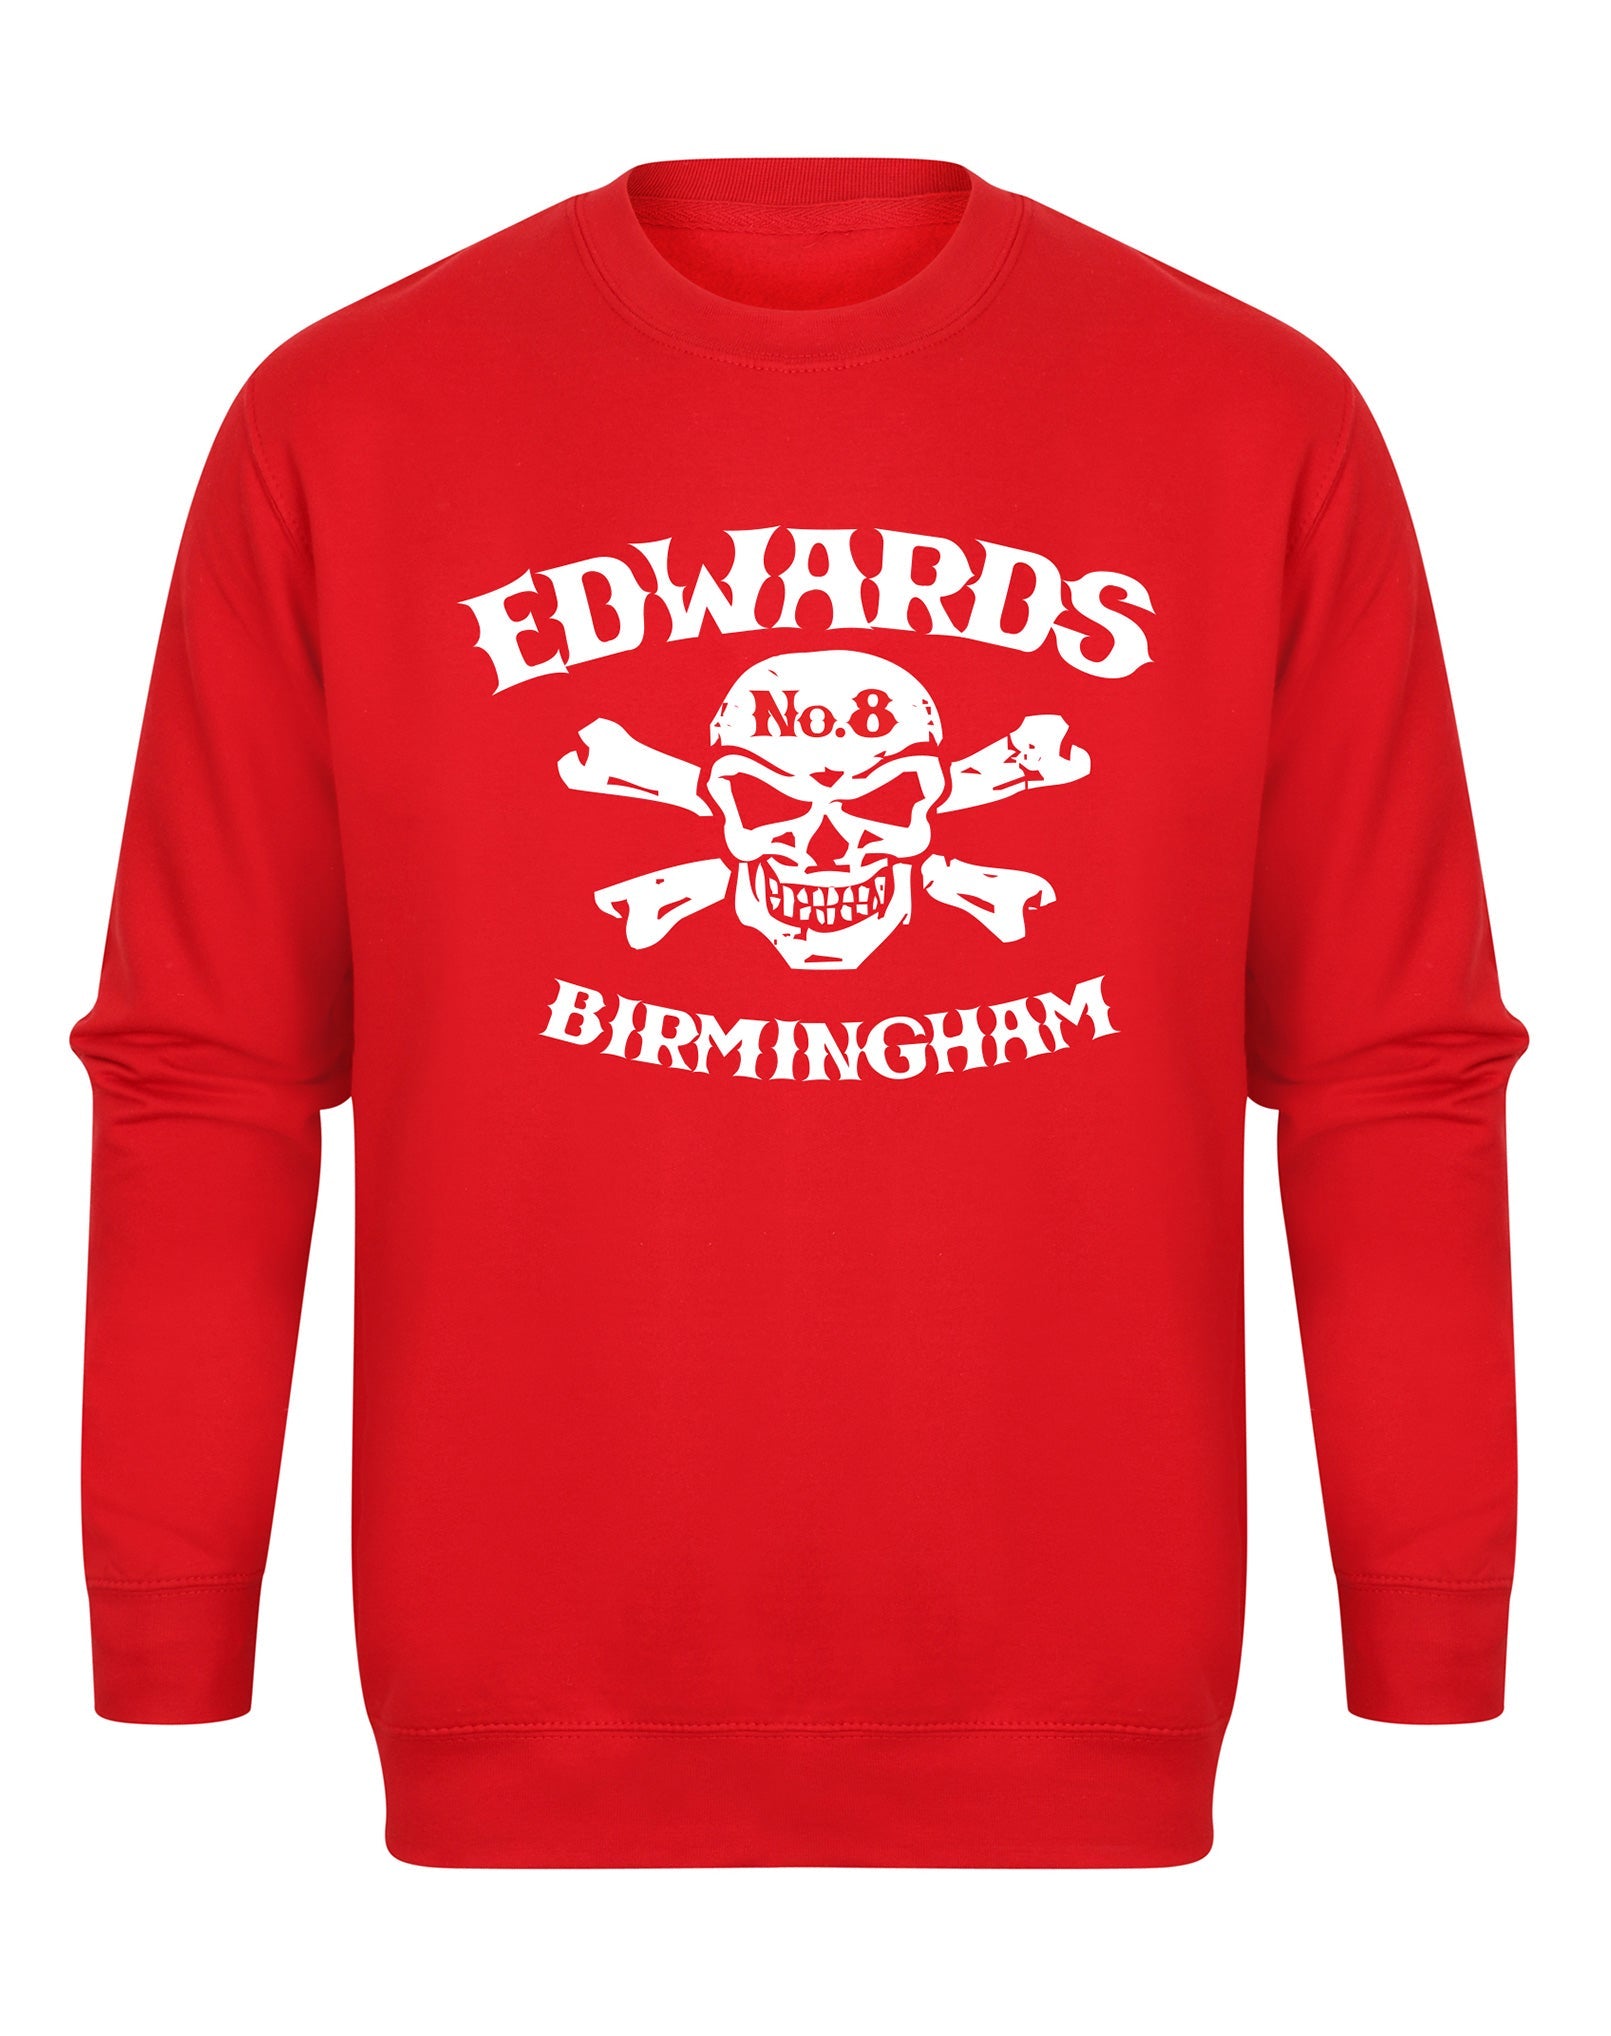 Edwards No. 8 - skull/crossbones - unisex fit sweatshirt - various colours - Dirty Stop Outs